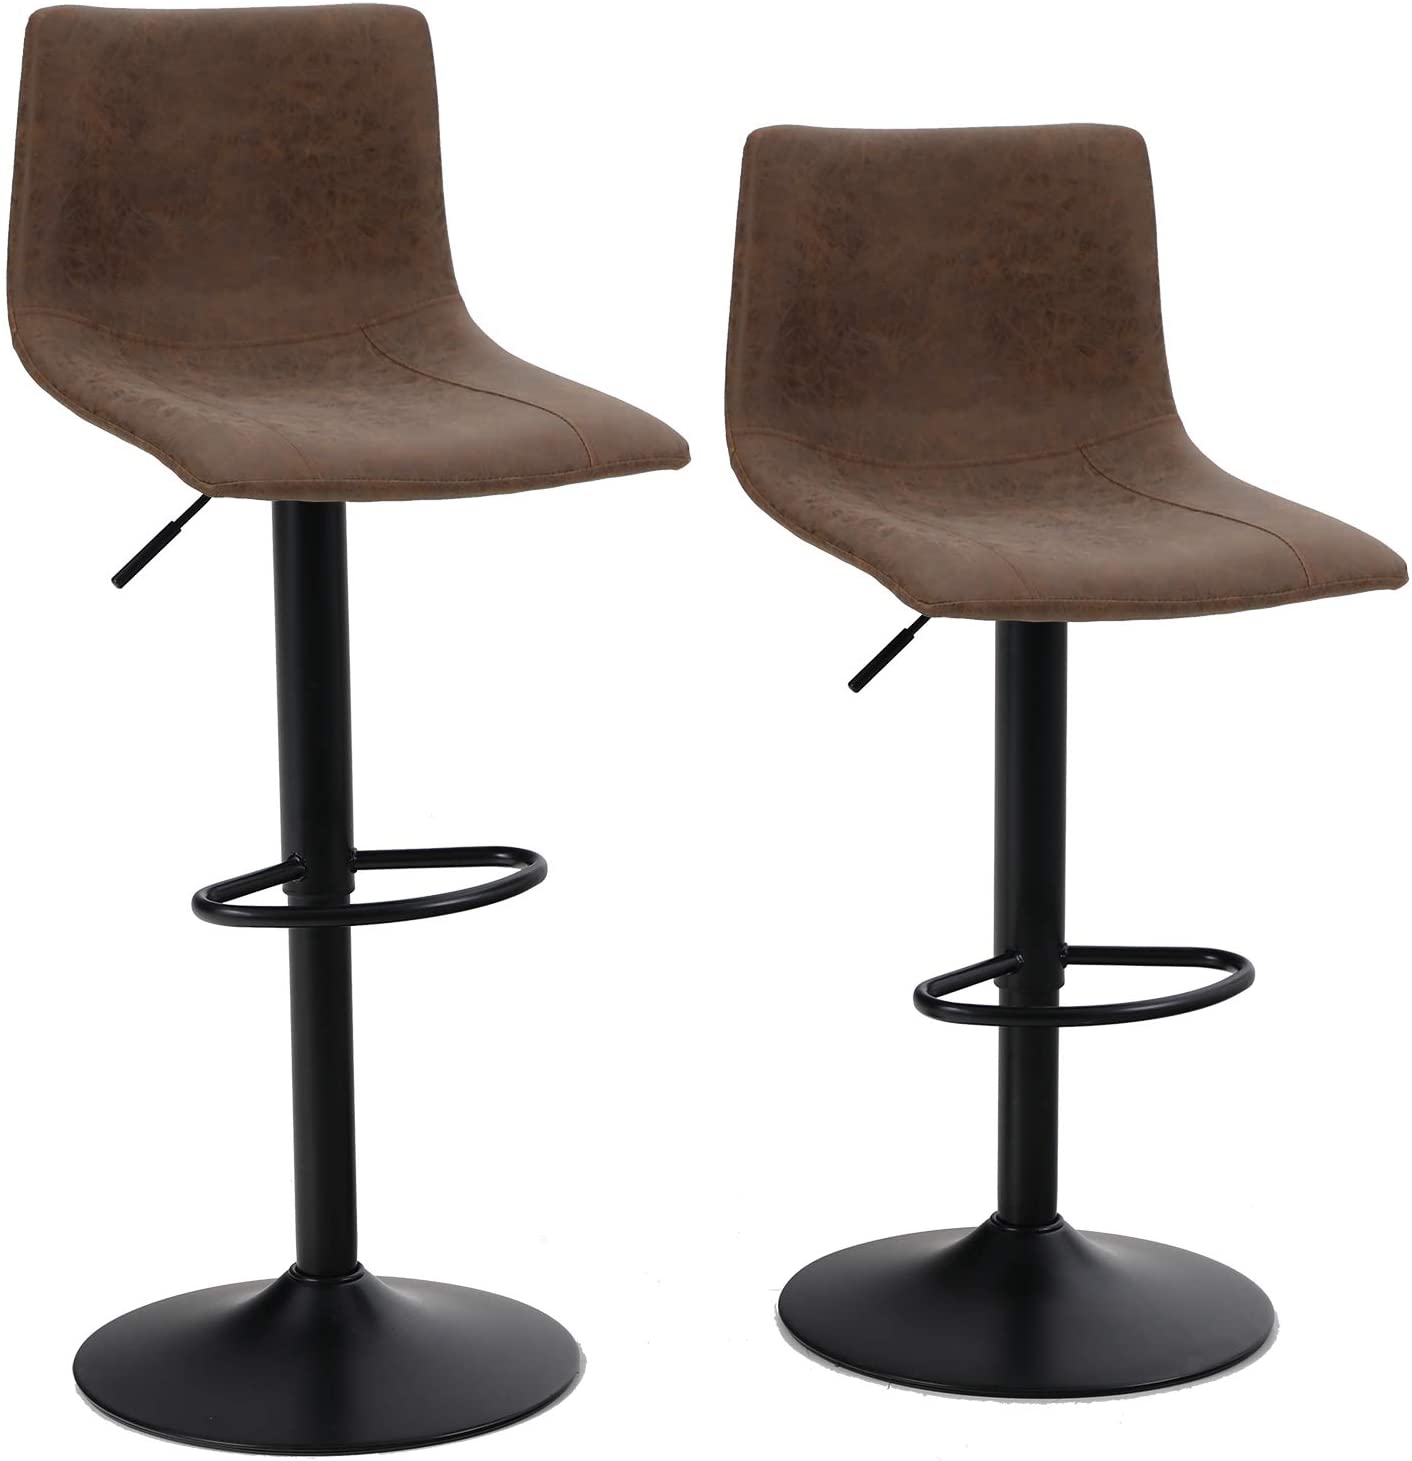 Bar Stool Modern Square Pu Leatherette Kitchen Counter Stools Dining Chairs Set of 2